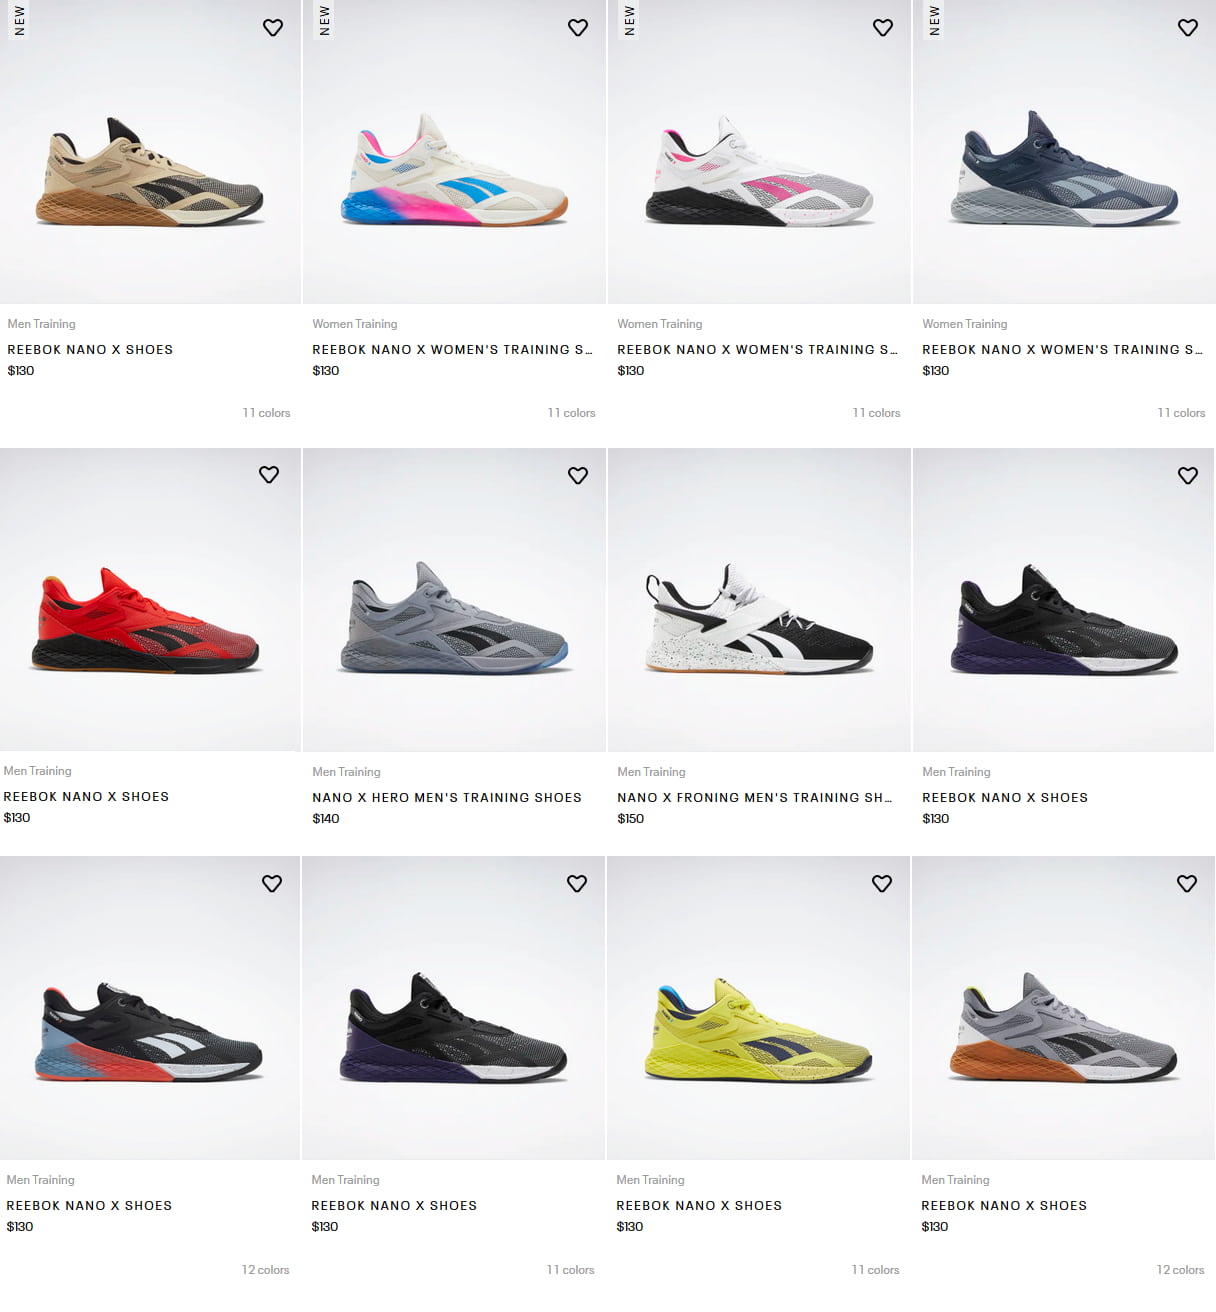  us reebok nano x Price list and color are availble in Reebok.com and amazon.com 